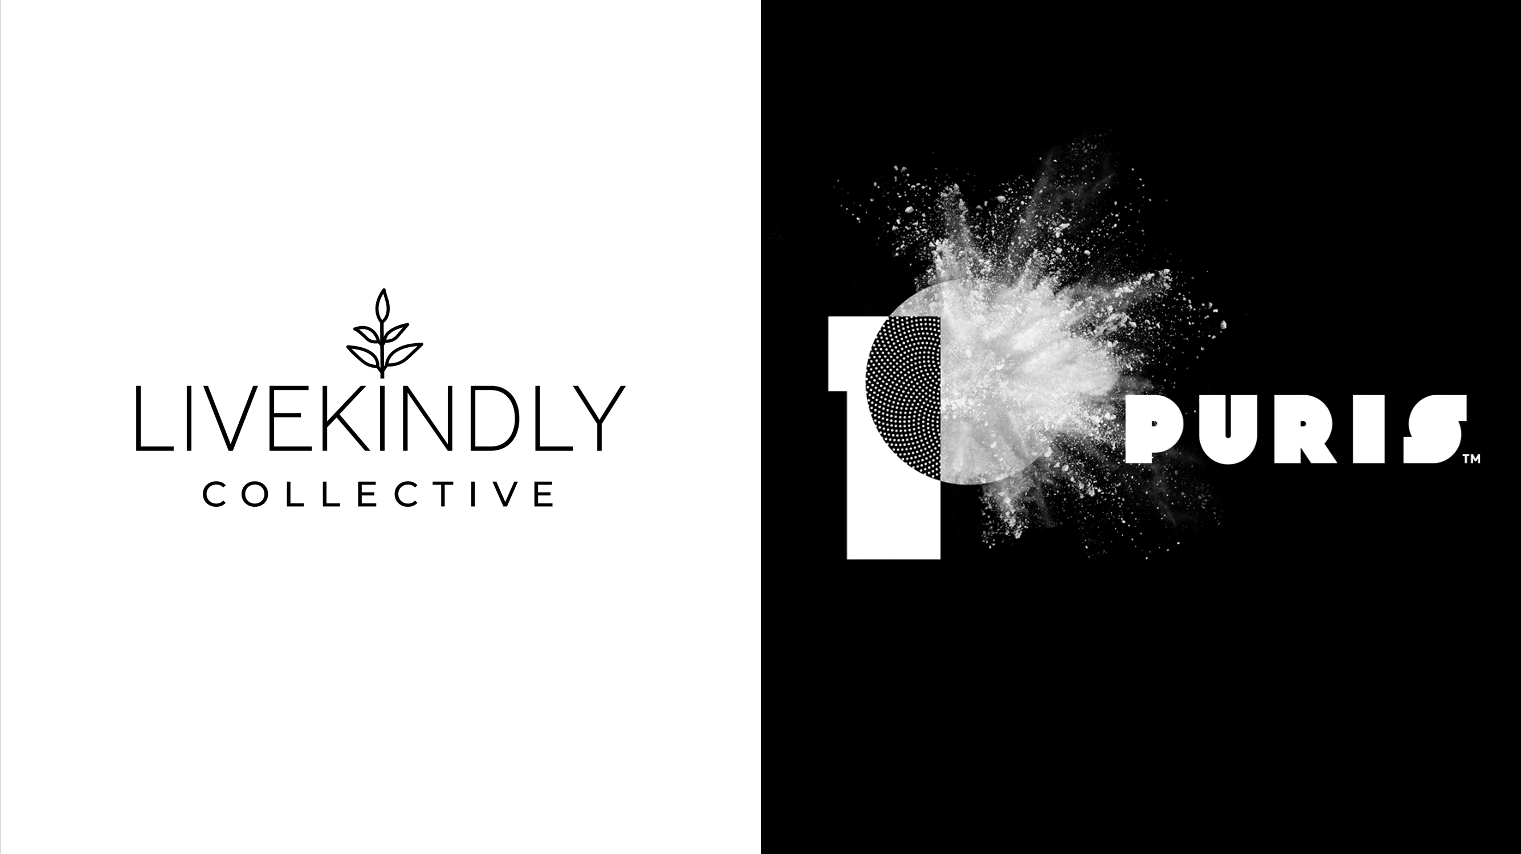 PURIS Holdings and LIVEKINDLY Collective Announce Joint Ventures to Lay the Foundation for a Global Regenerative Plant-Based Future